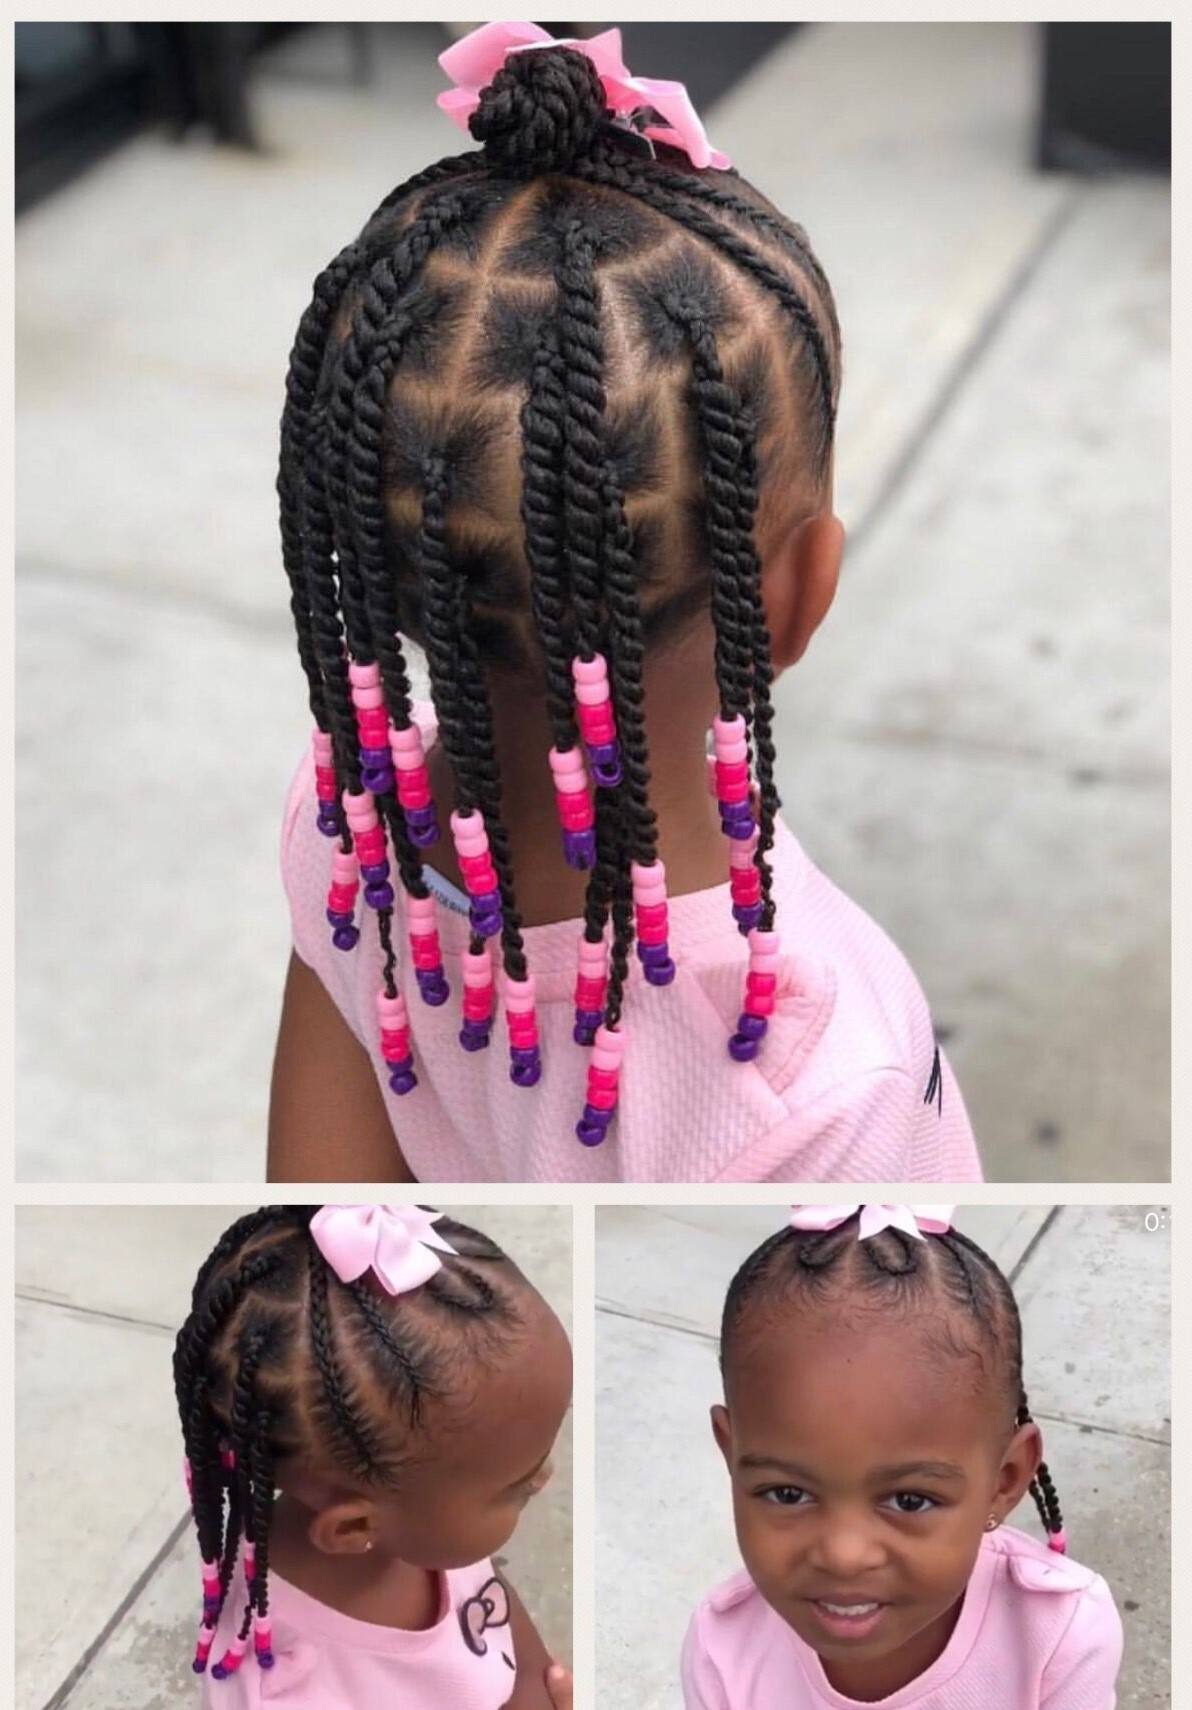 17 Easy Kids' Hairstyles - Today's Parent